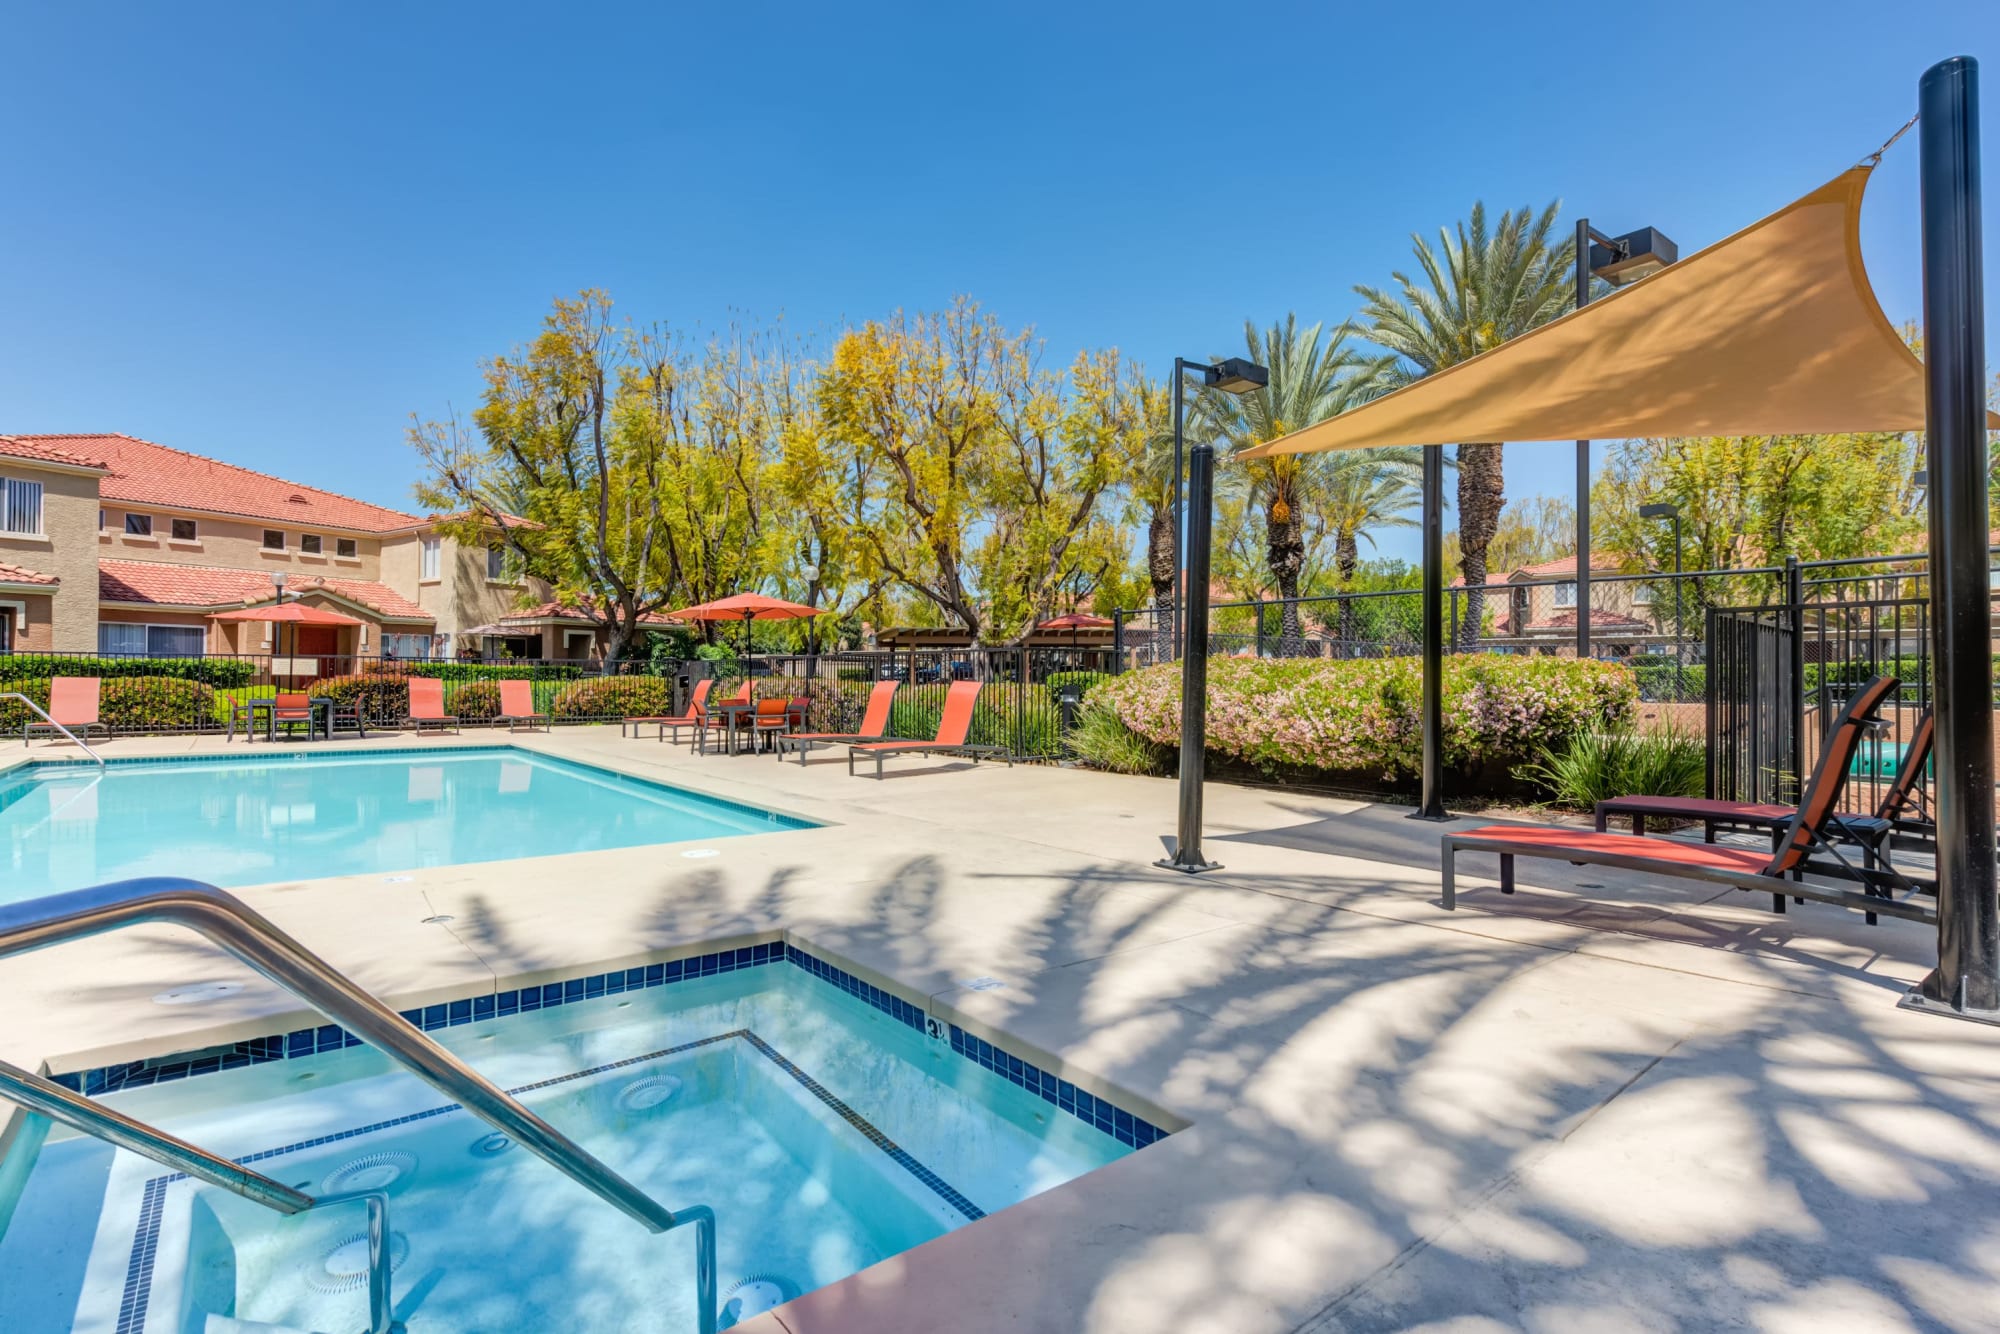 Spa and pool with lounge chairs and umbrellas at Tuscany Village Apartments in Ontario, California